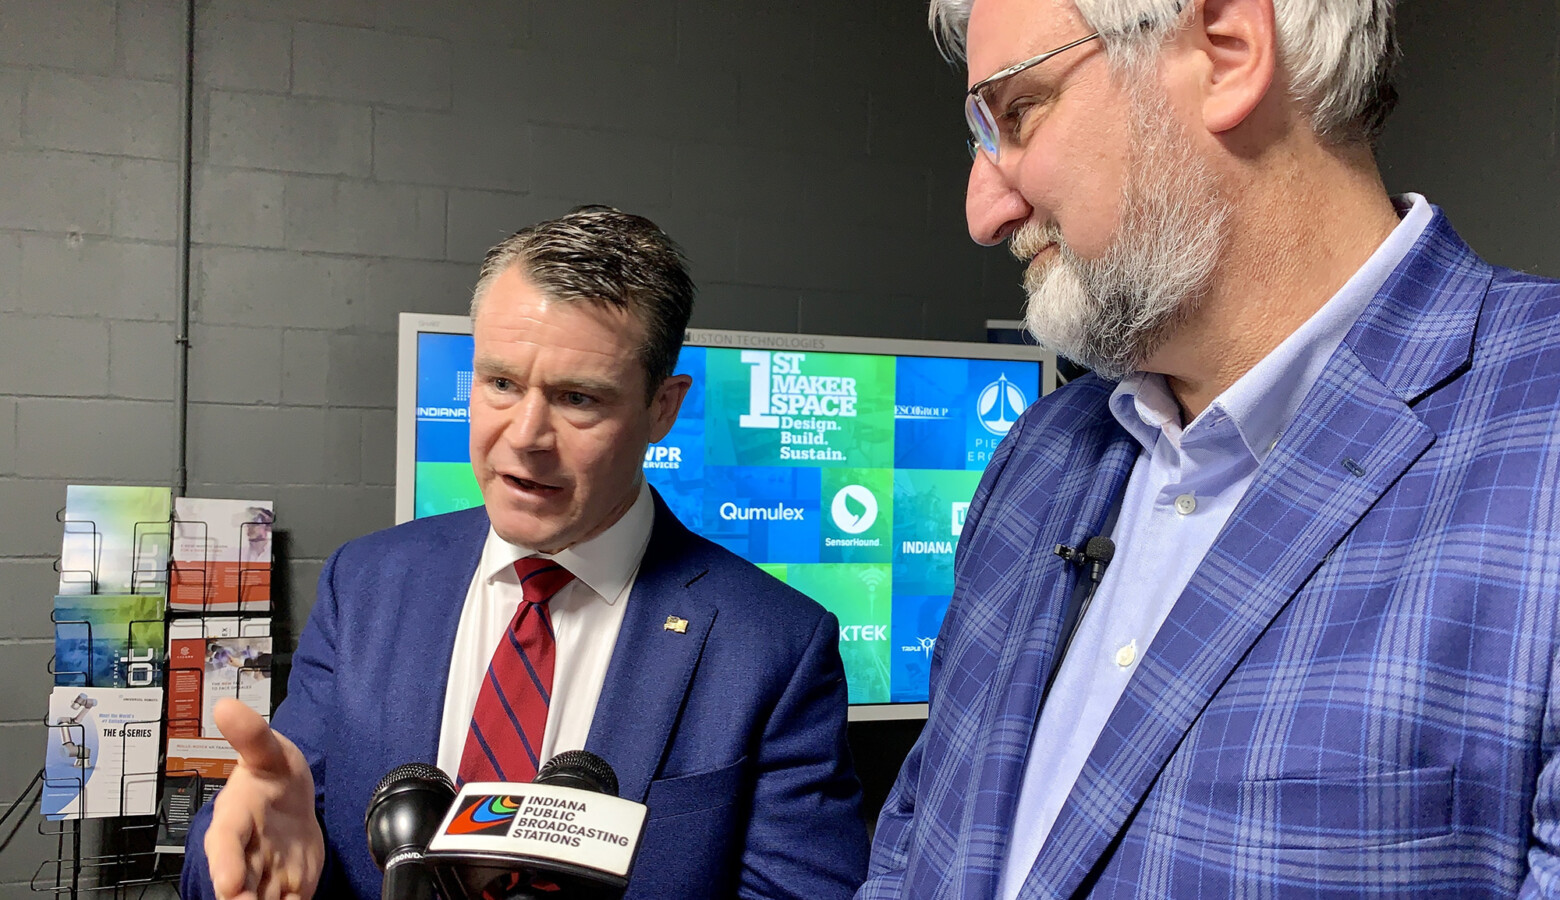 Sen. Todd Young (R-Ind.), left, and Gov. Eric Holcomb, right, said Indiana is well-positioned to compete for one of the regional technology hubs created by Young's Endless Frontier Act. (Brandon Smith/IPB News)